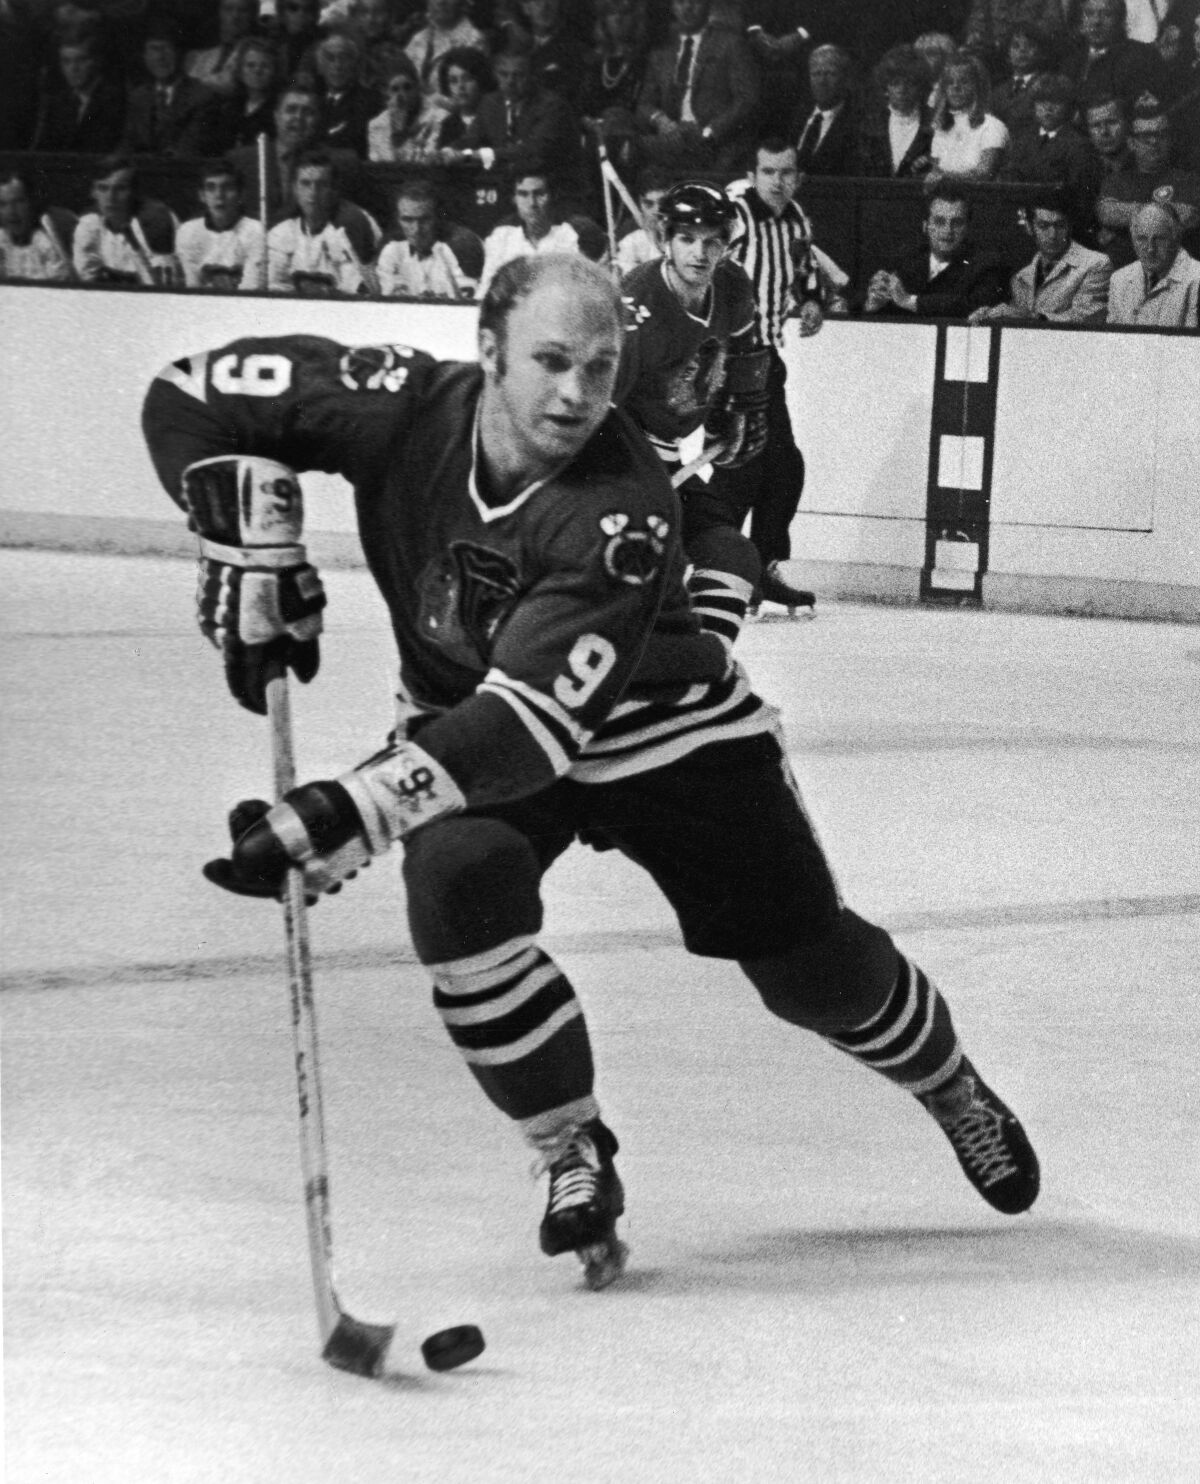 1969 photograph of hockey player Bobby Hull handling the puck during a game against the Montreal Canadiens.